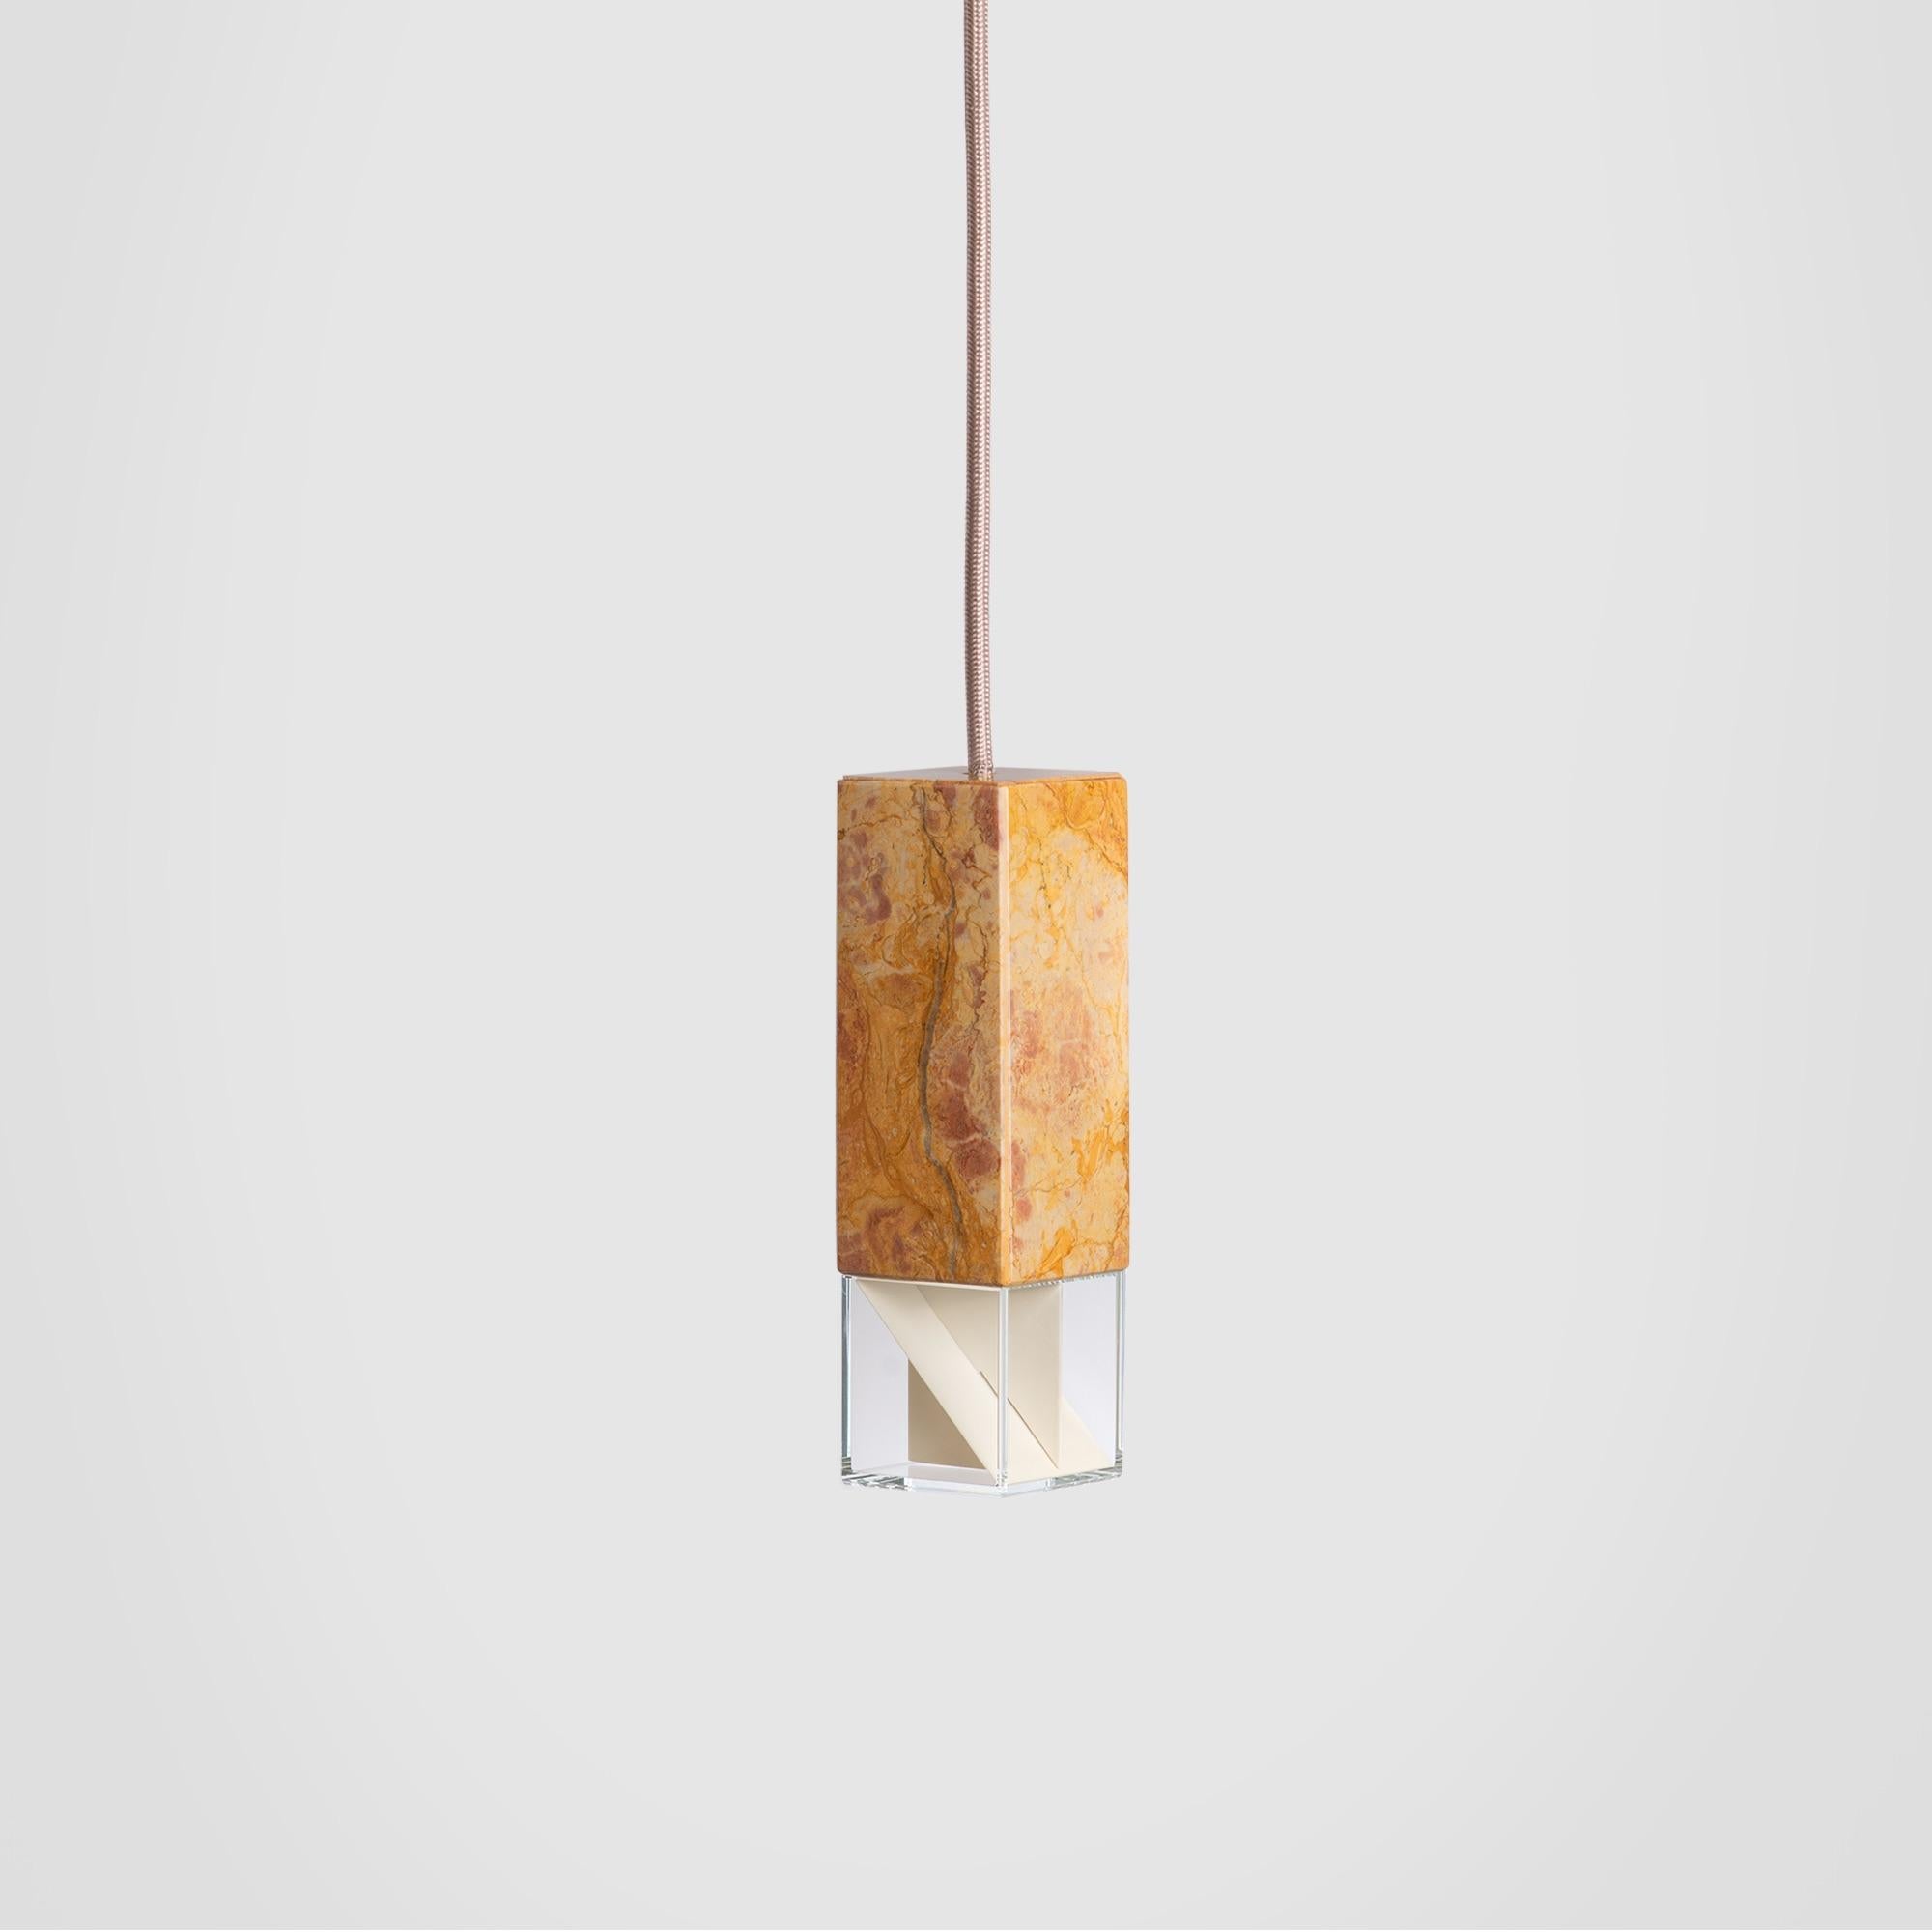 About
Yellow Marble Trio Chandelier Ceiling Light by Formaminima

Lamp/One Yellow Trio from Colour Edition
Design by Formaminima
Chandelier
Materials:
Body lamp handcrafted in translucent marble Royal Pink Yellow / crystal glass diffuser hosting